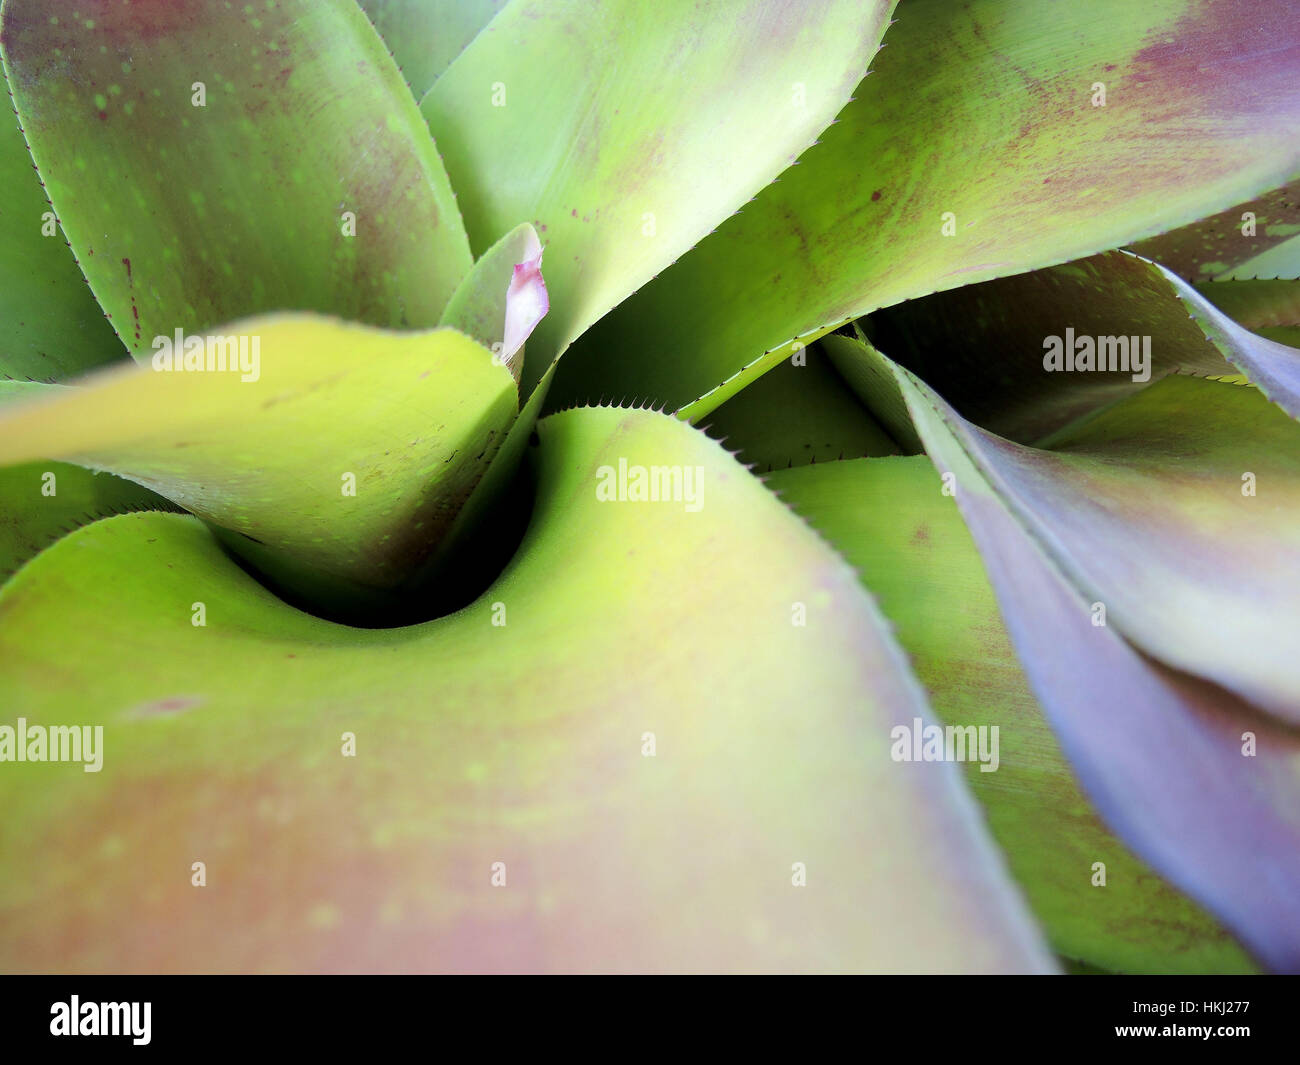 Abstract image of bromeliad plant in the garden Stock Photo